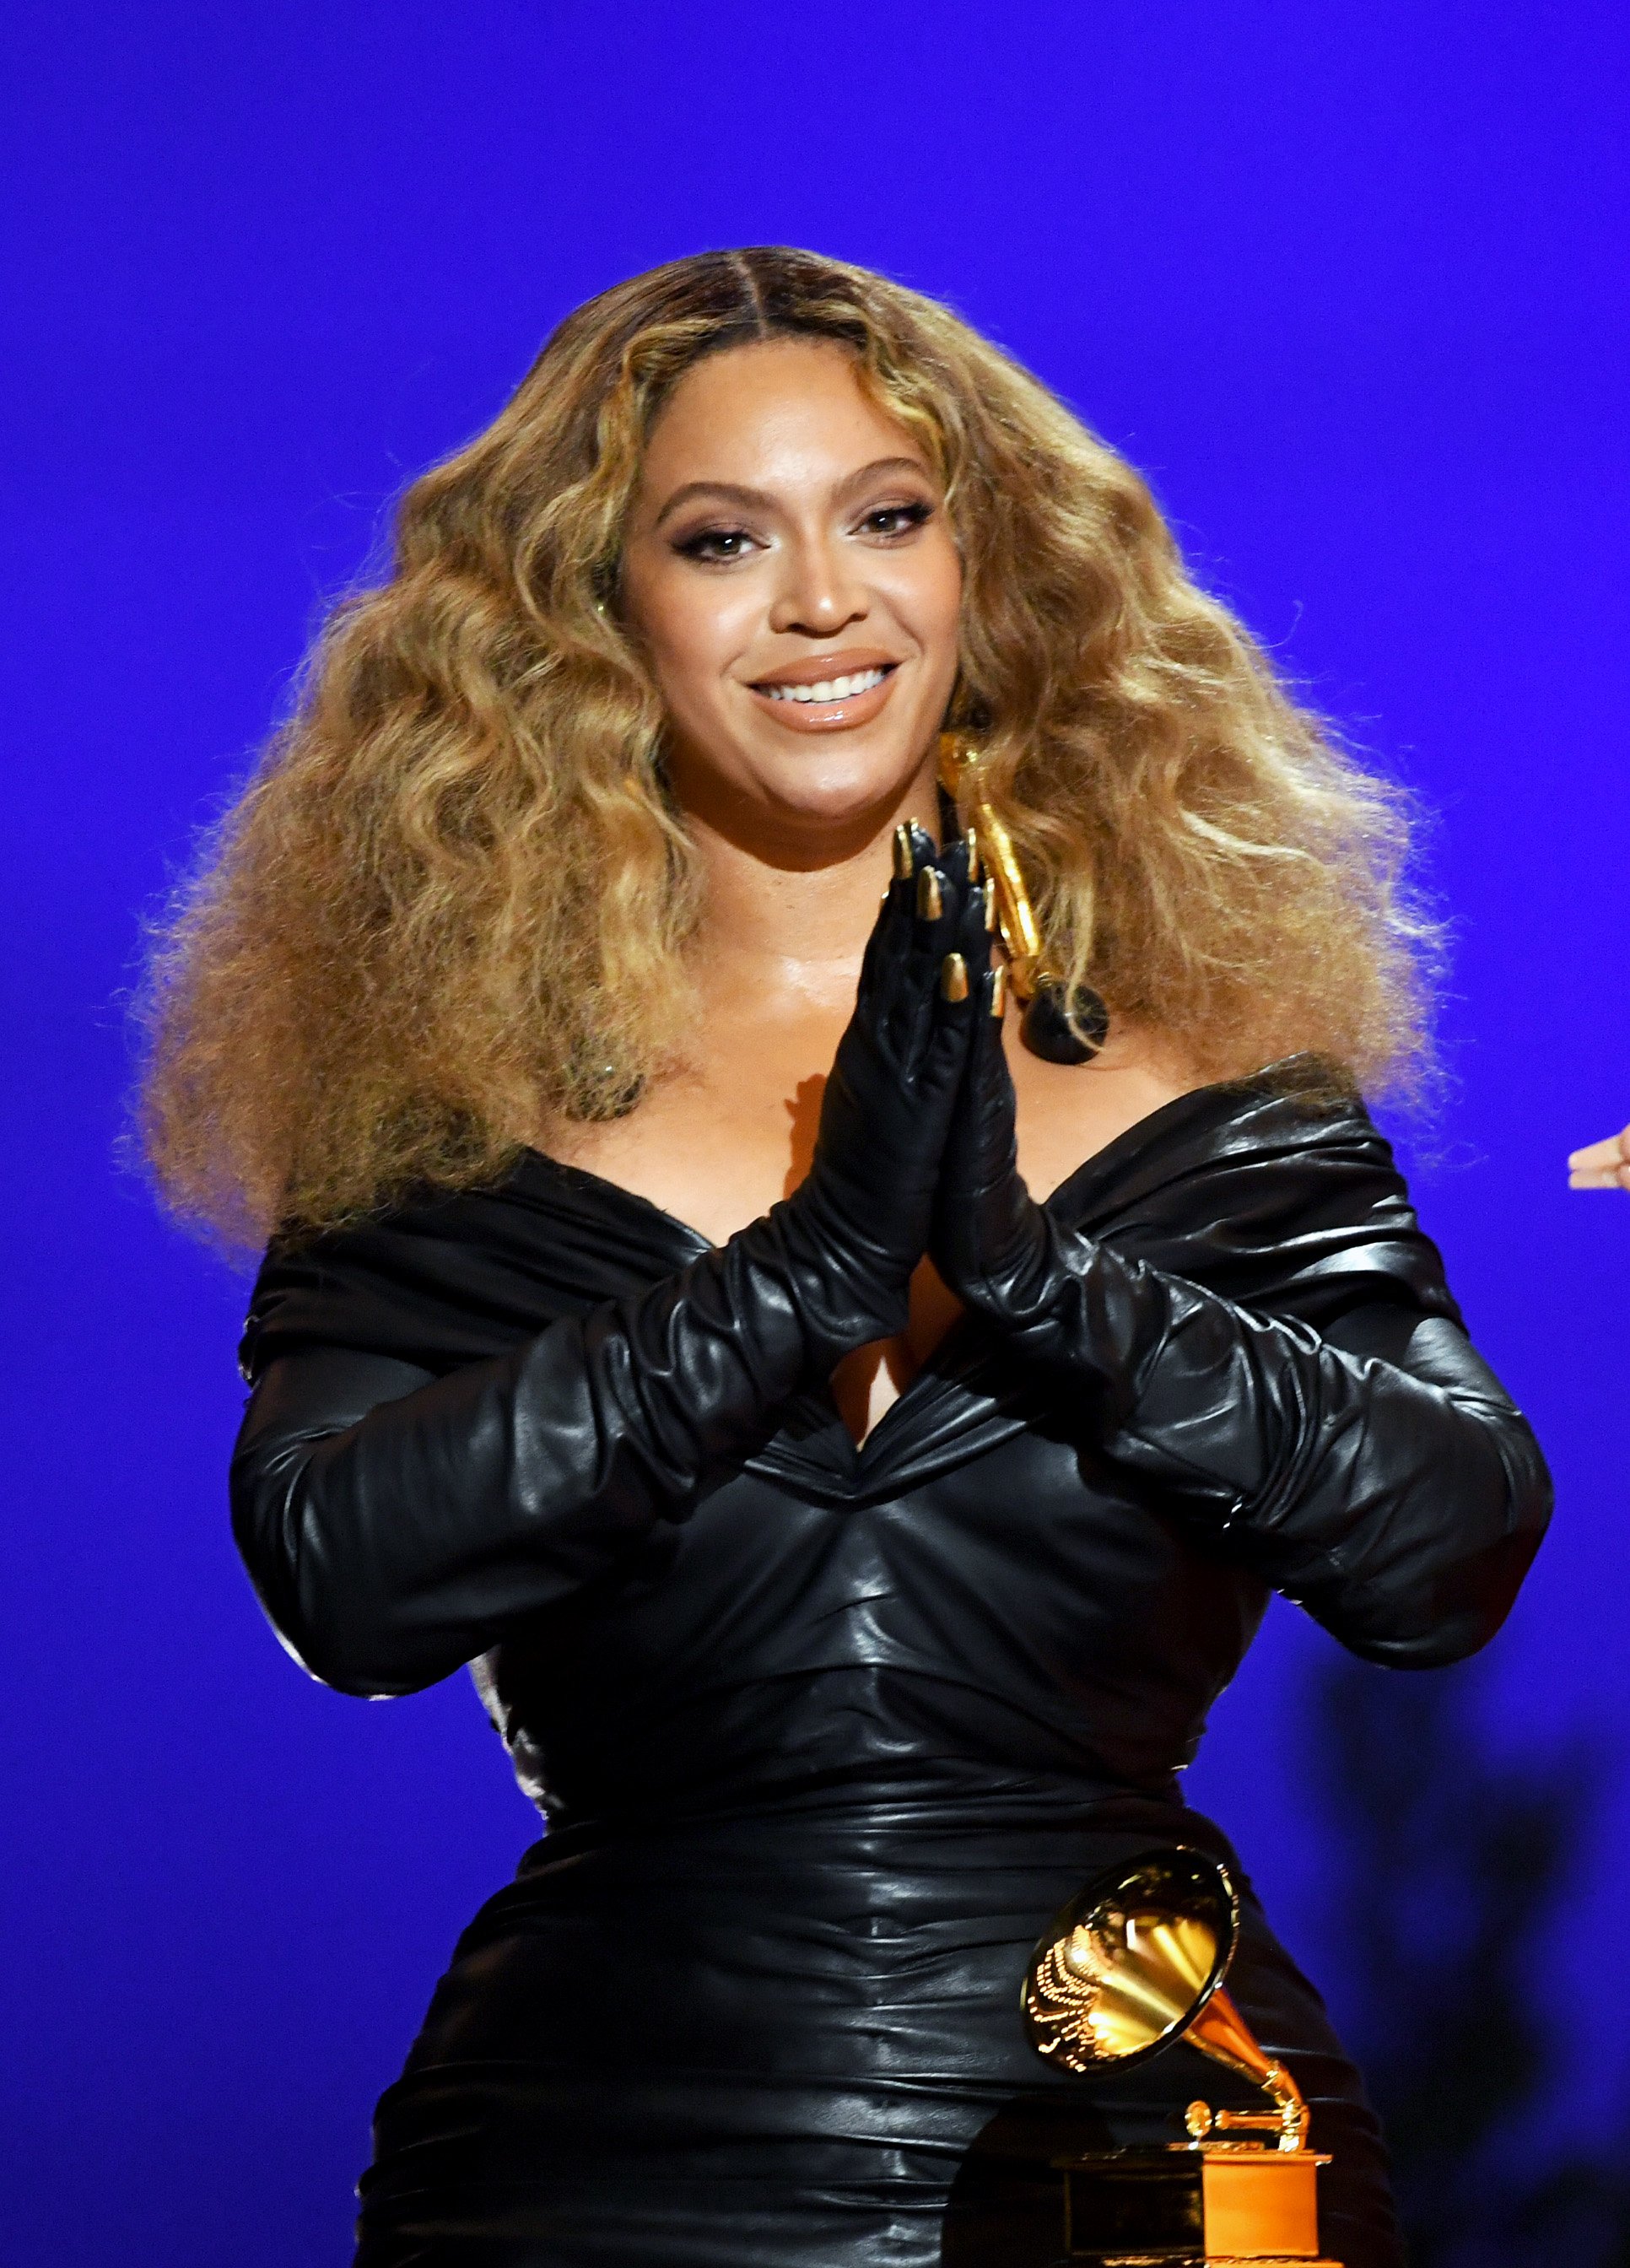 Beyoncé accepts an award at the 63rd Annual Grammy Awards on March 14, 2021 | Photo: Getty Images